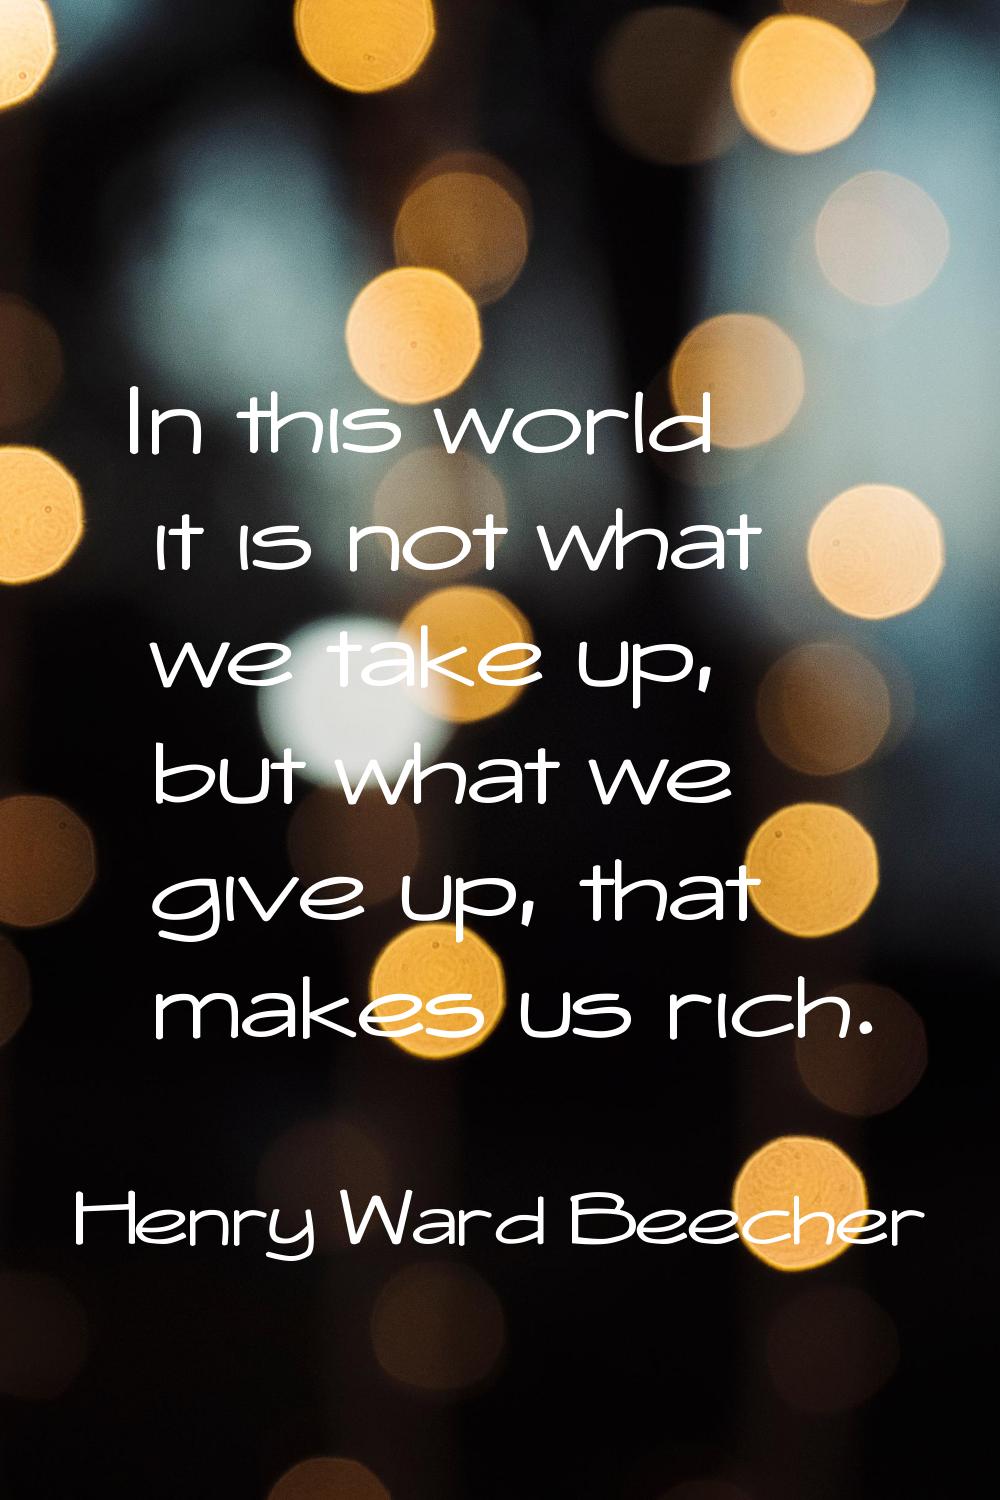 In this world it is not what we take up, but what we give up, that makes us rich.